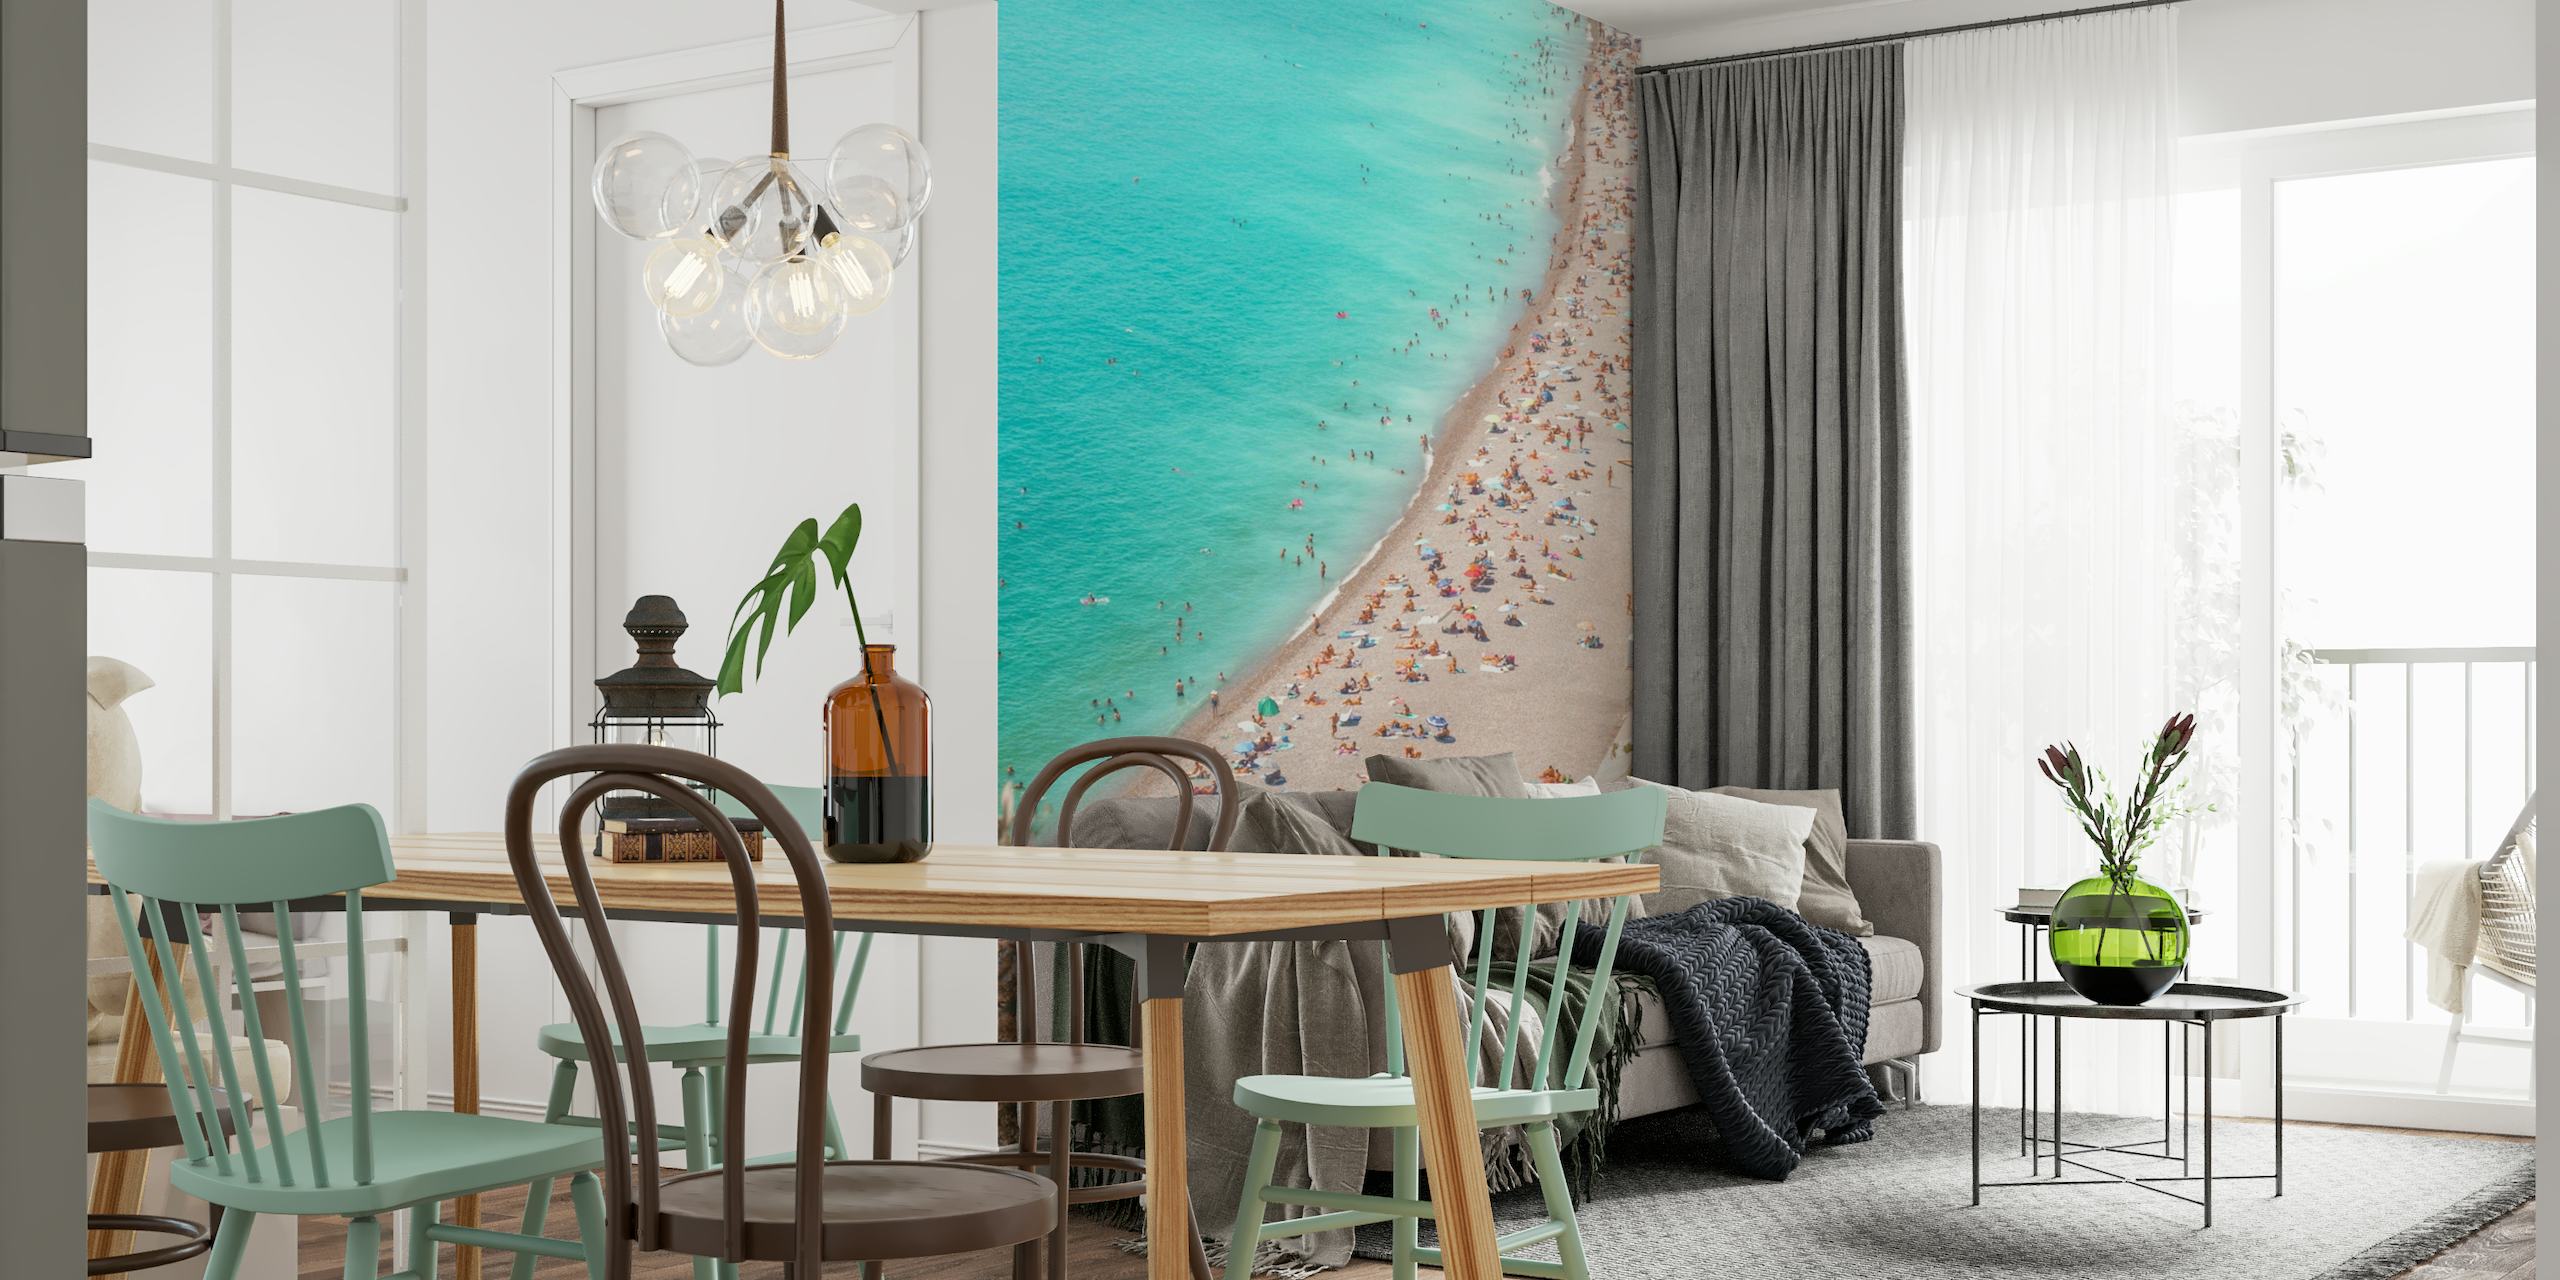 Mediterranean Riviera beach scene wall mural with clear blue waters and sandy shores